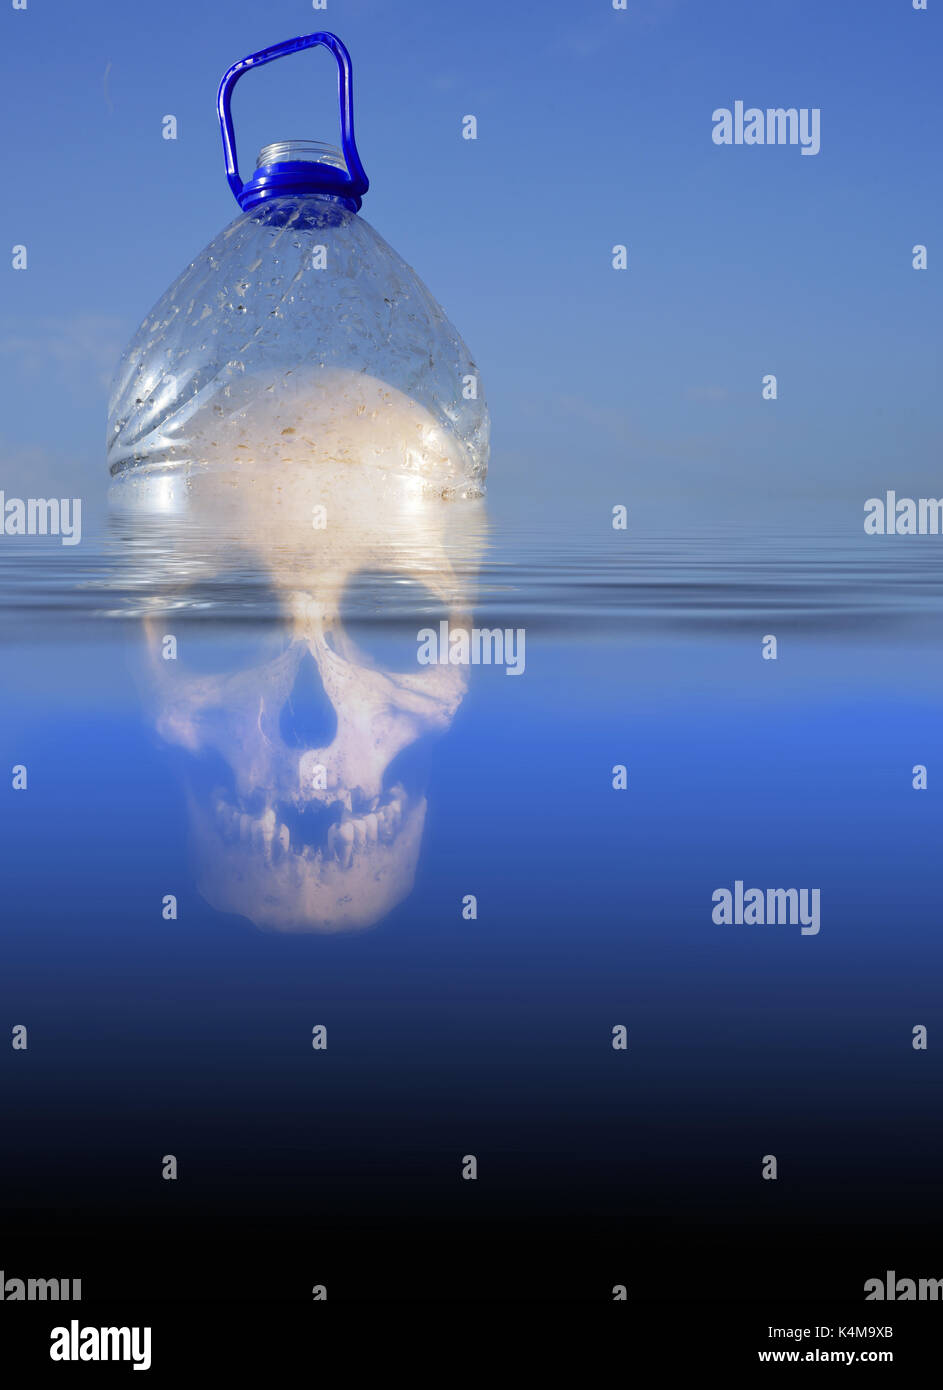 Pollution themed design of a plastic PET drinking container floating in sea water with a human skull submerged beneath the environment Stock Photo